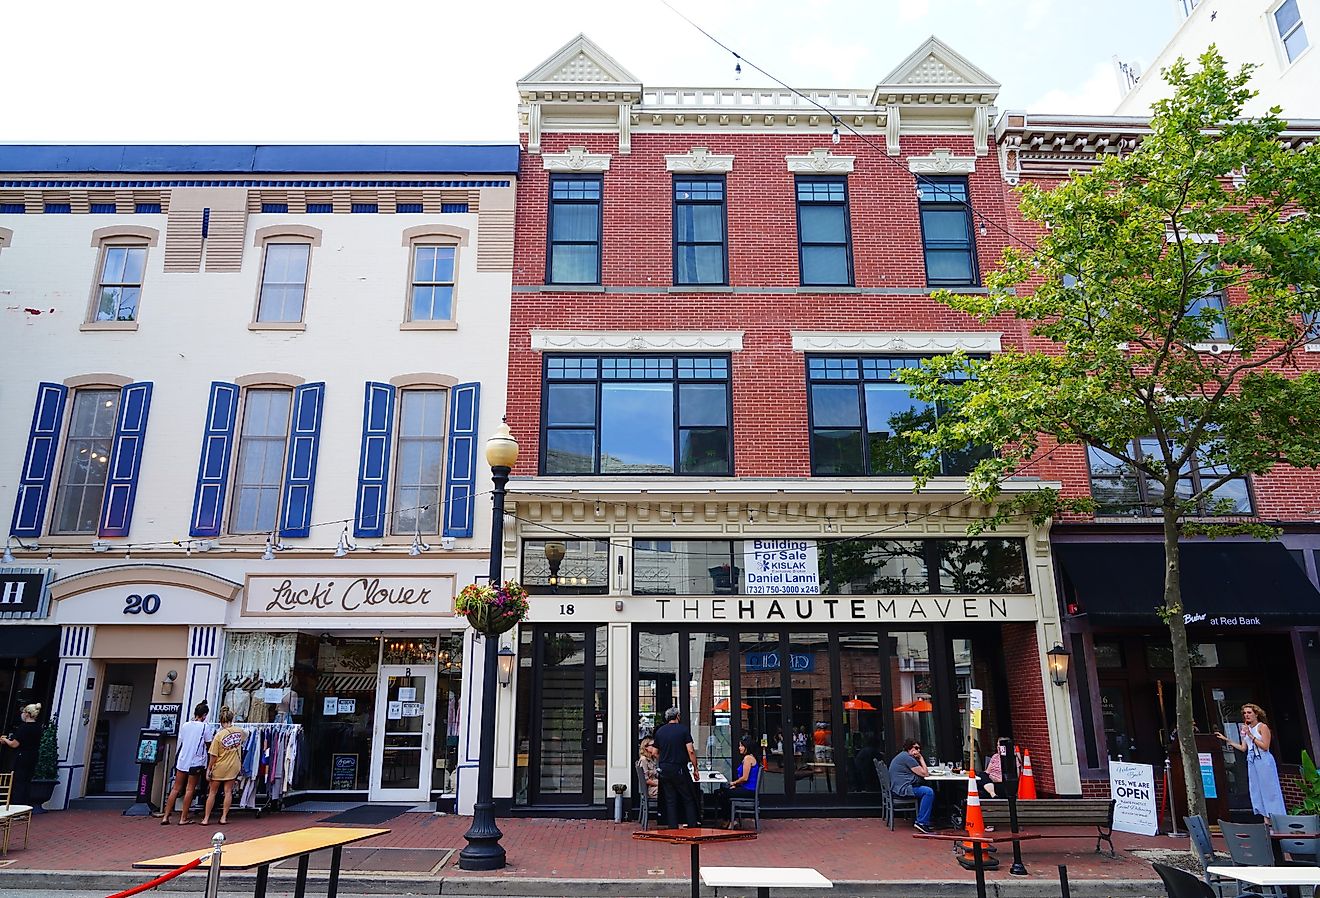 Downtown buildings on Broad Street in Red Bank, New Jersey. Image credit EQRoy via Shutterstock.com